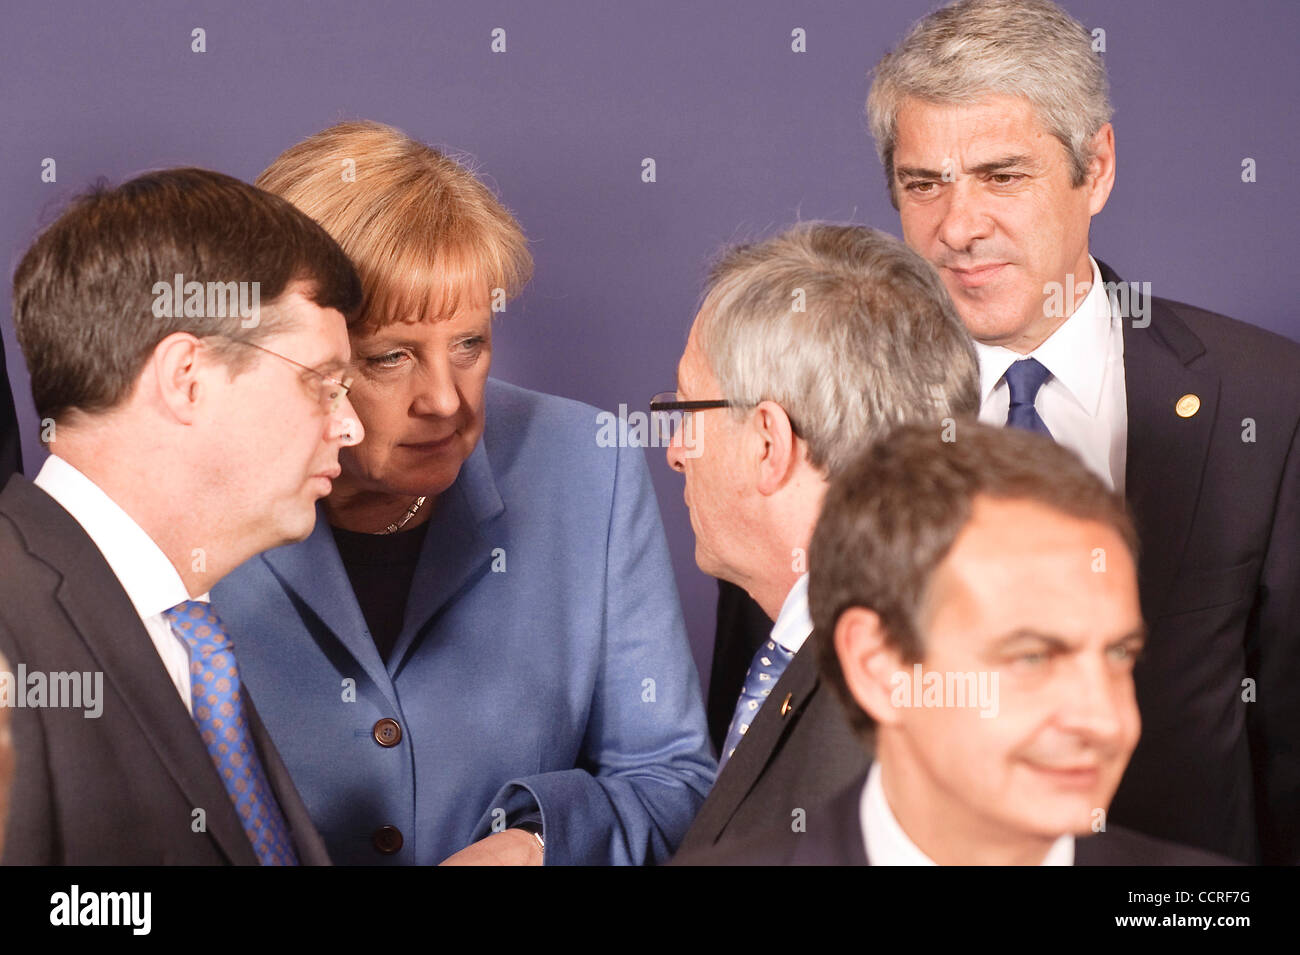 (L-R)   German Chancellor Angela Merkel (C) , Dutch Prime Minister Jan Peter Balkenende (L) and  Luxembourg's Prime Minister Jean-Claude Juncker chat during a group photo at an EU summit  in  Brussels, Belgium on 2010-03-25  European leaders are facing a moment of truth at a Thursday summit, as mark Stock Photo